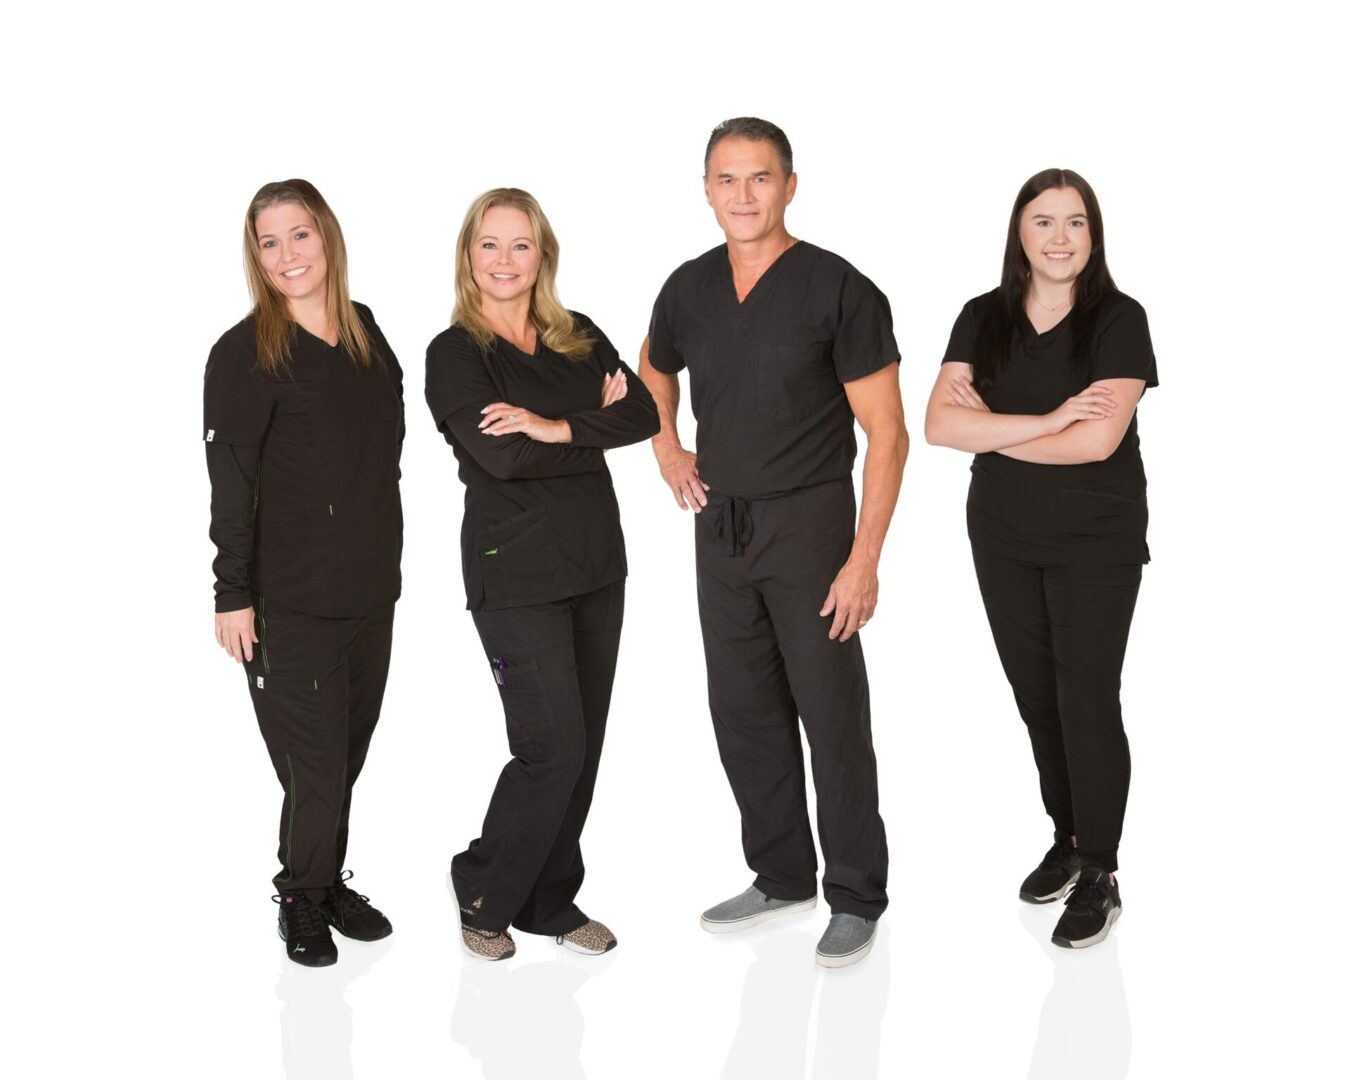 Four people in black scrubs standing together on a white background